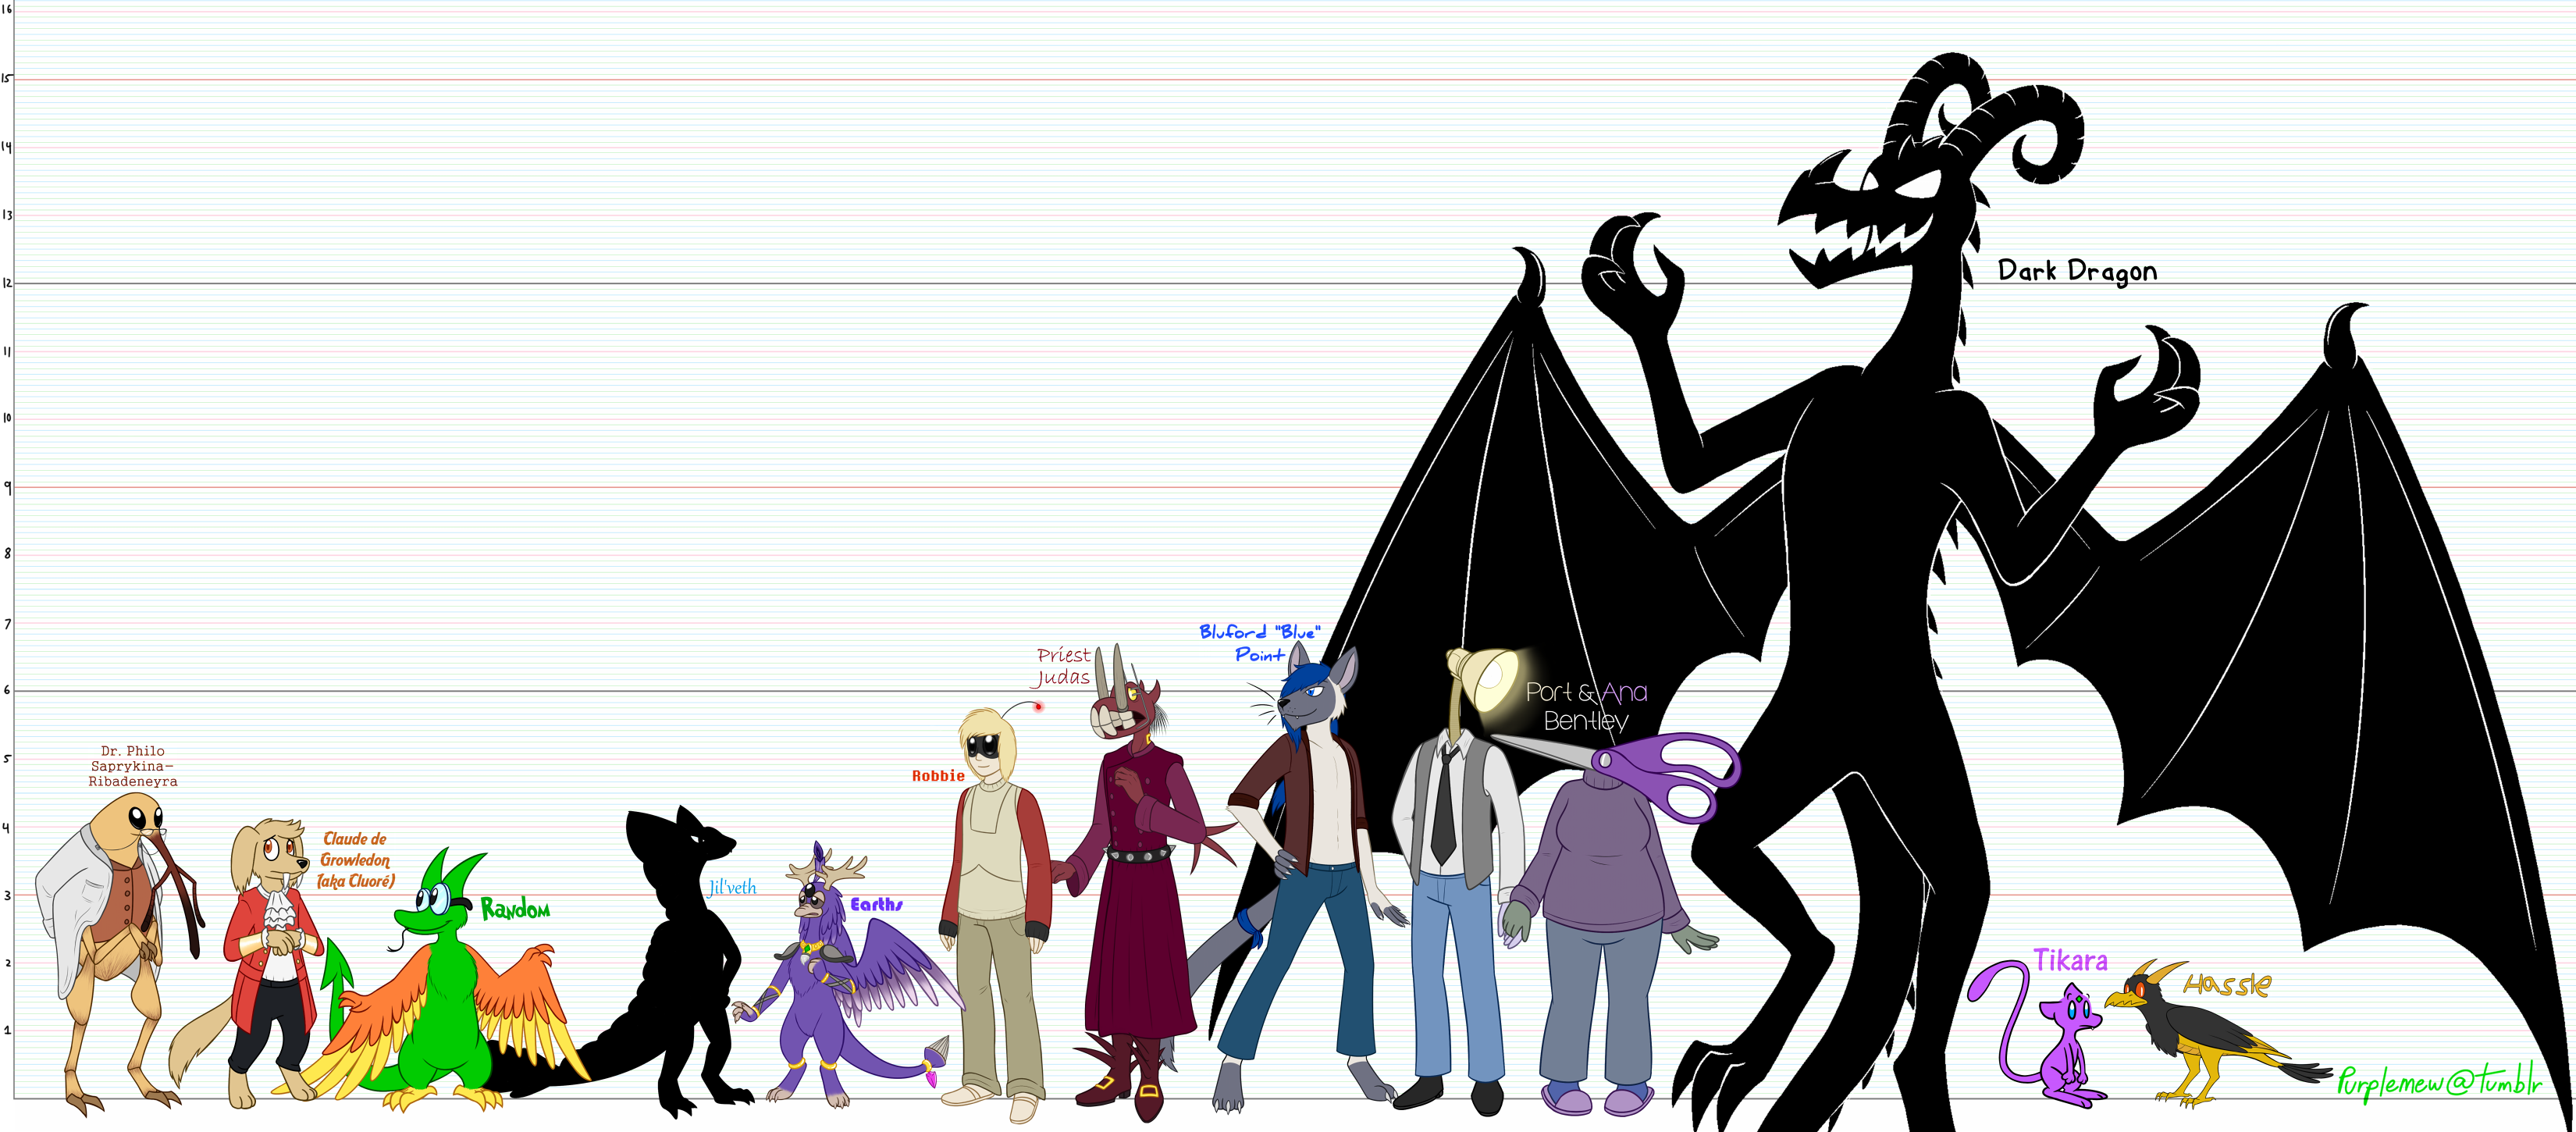 Character Size Chart